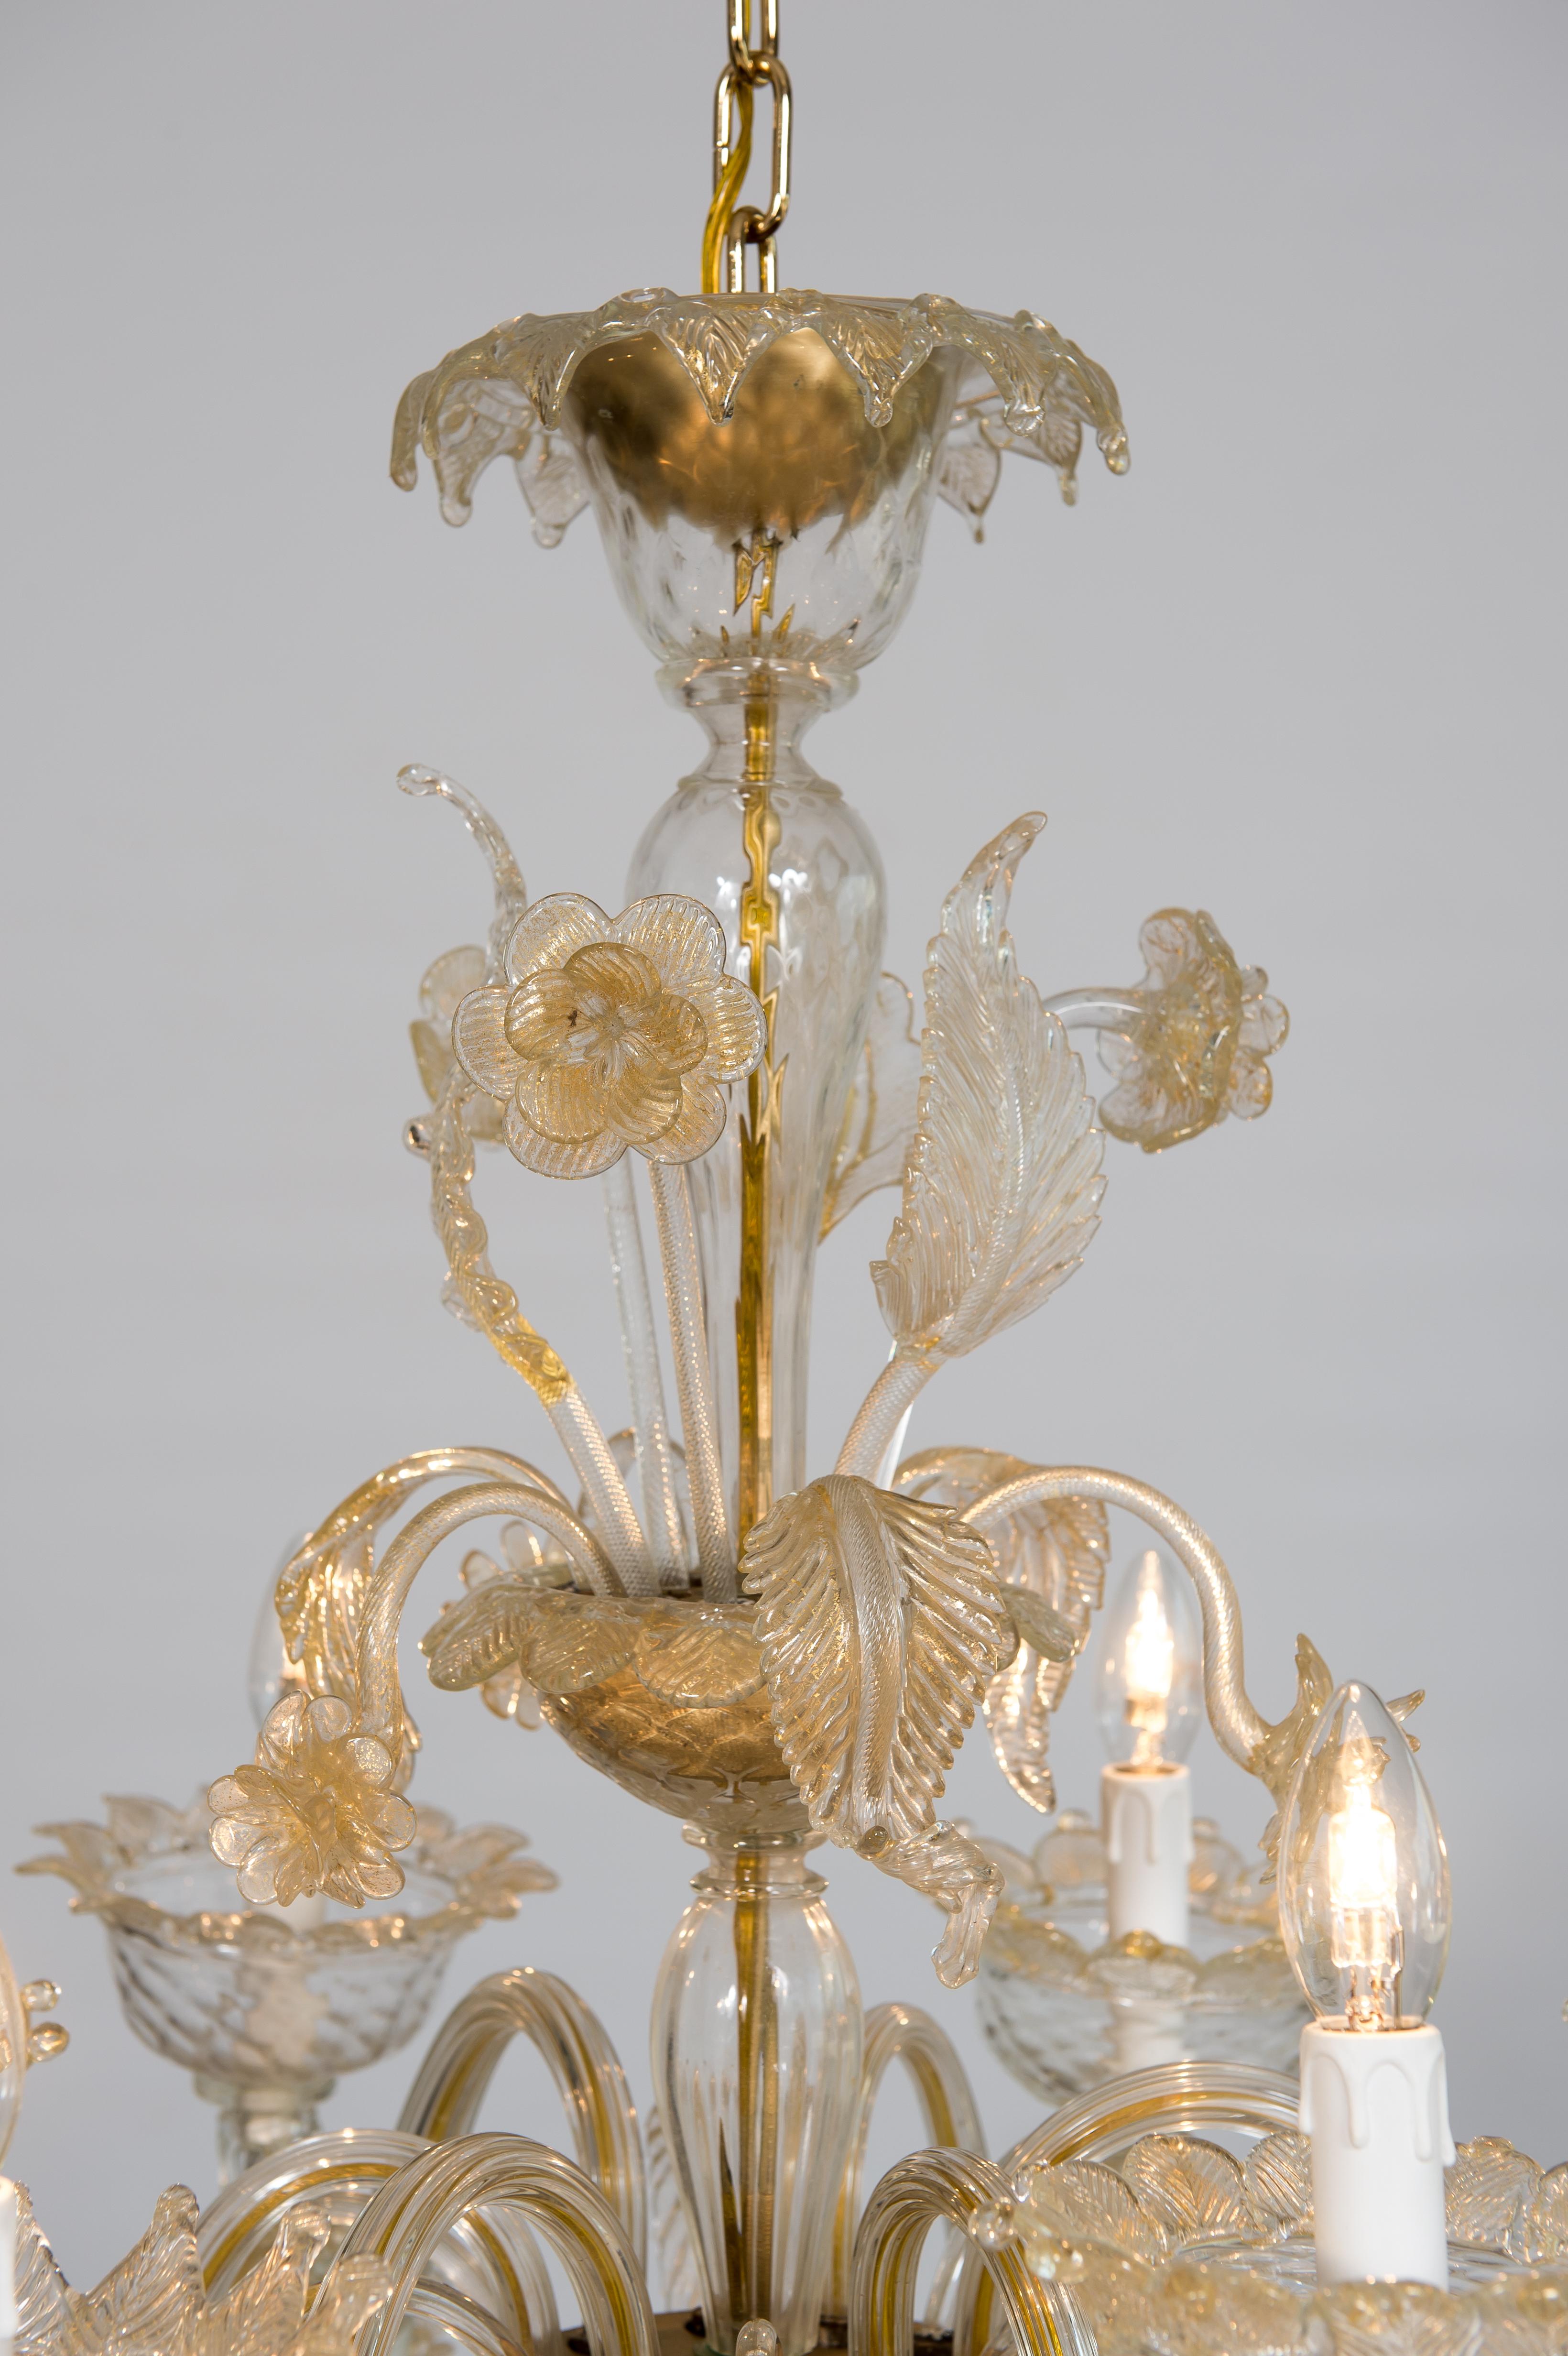 Golden Murano Glass Chandelier with “Vere” Decorations, 20th Century, Italy For Sale 10